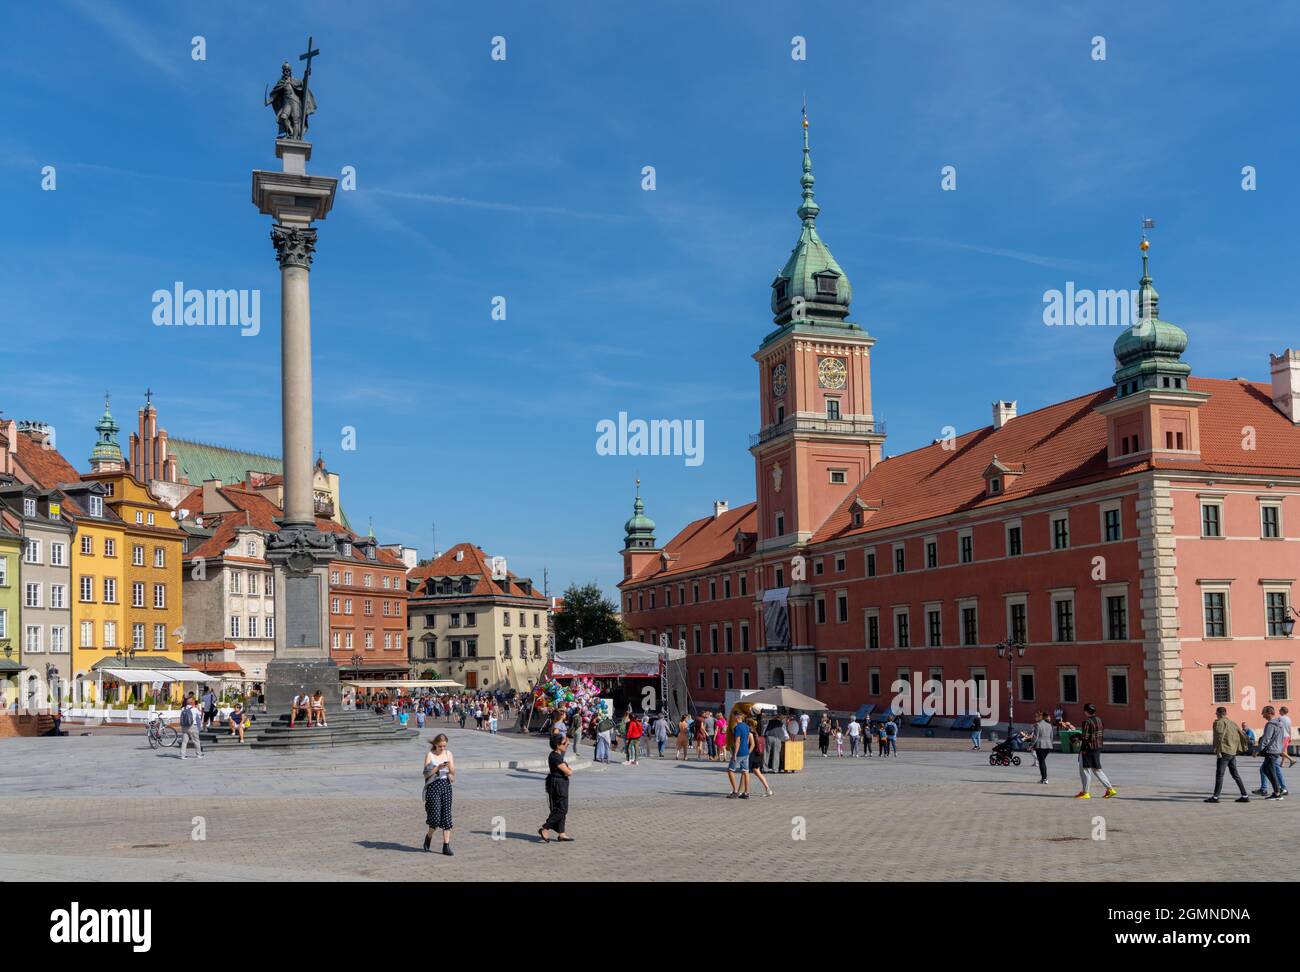 Warsaw, Poland - September 11, 2021: view of the Zamkowy Square with the Royal Castle and the Column of Sigismund in downtown Warsaw Stock Photo